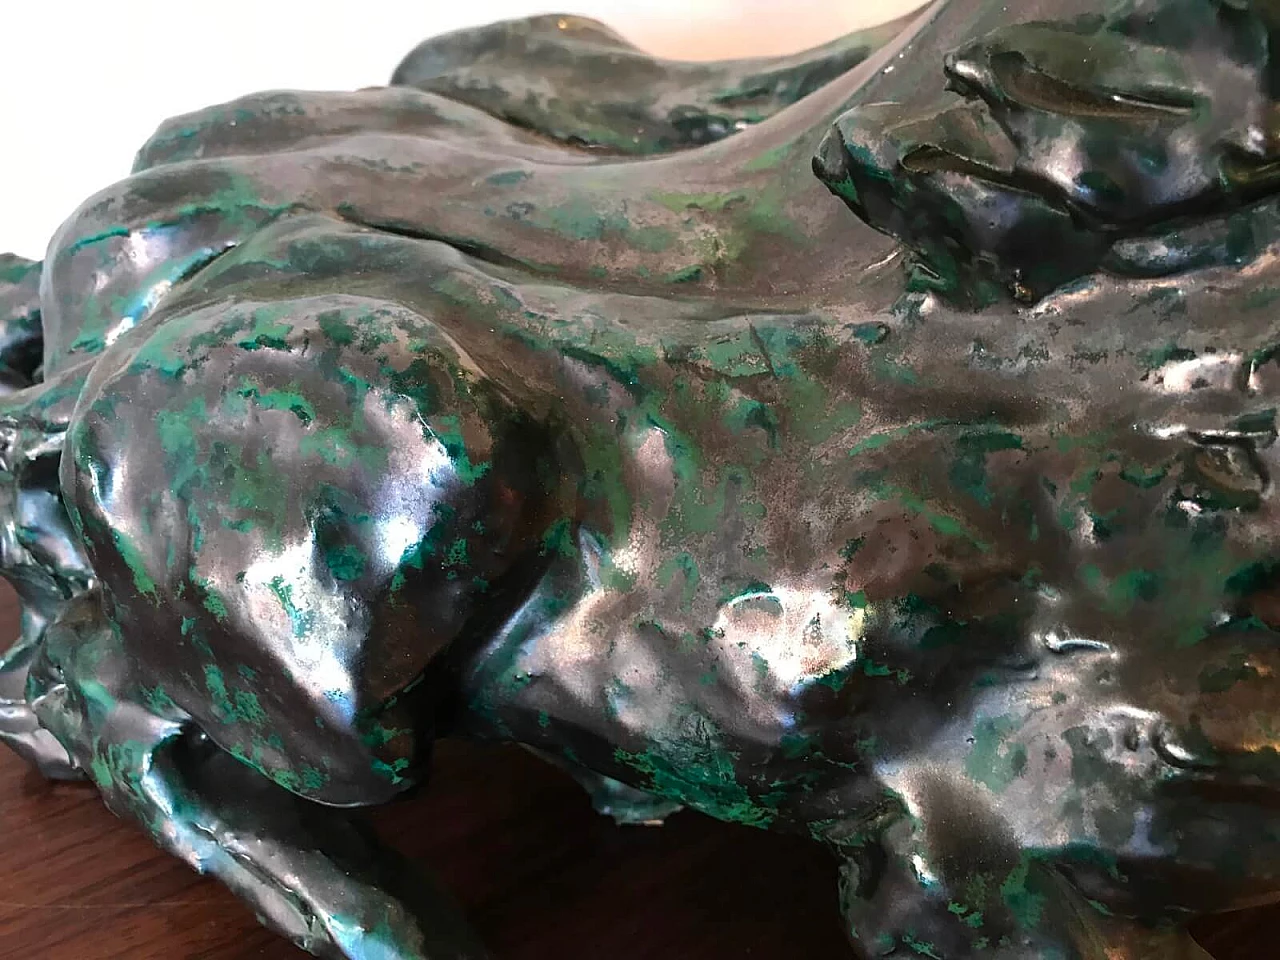 Sculpture by Umberto Ghersi with three ceramic horses 6